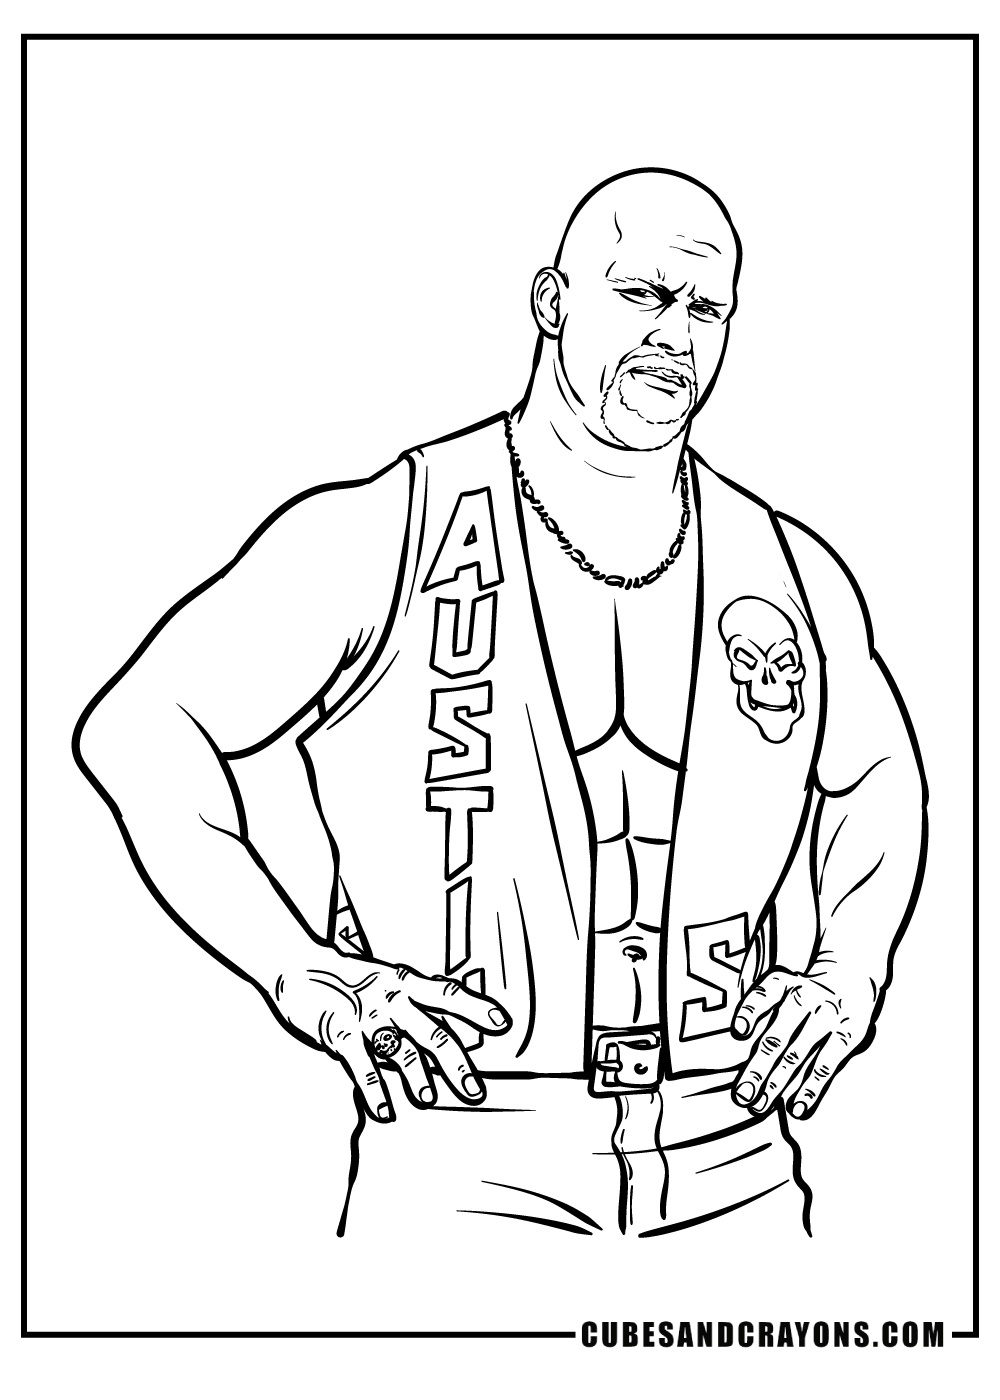 WWE Coloring Sheet for children free download